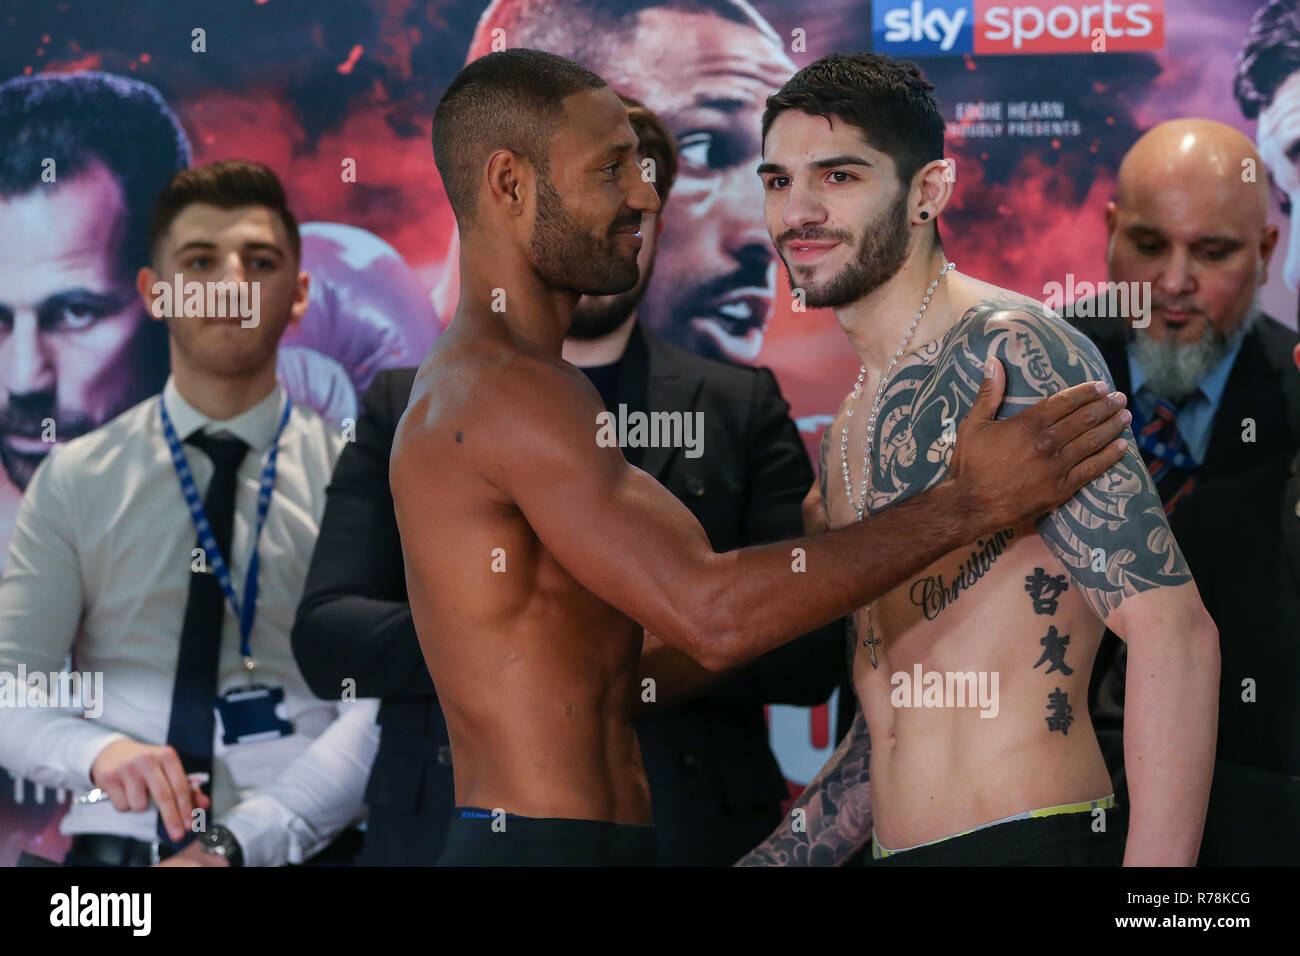 Kell Brook puts his hand on Michael Zerafa during the Kell Brook and Michael Zerafa Matchroom Boxing weigh in at the Millennium Gallery, Sheffield. Pi Stock Photo